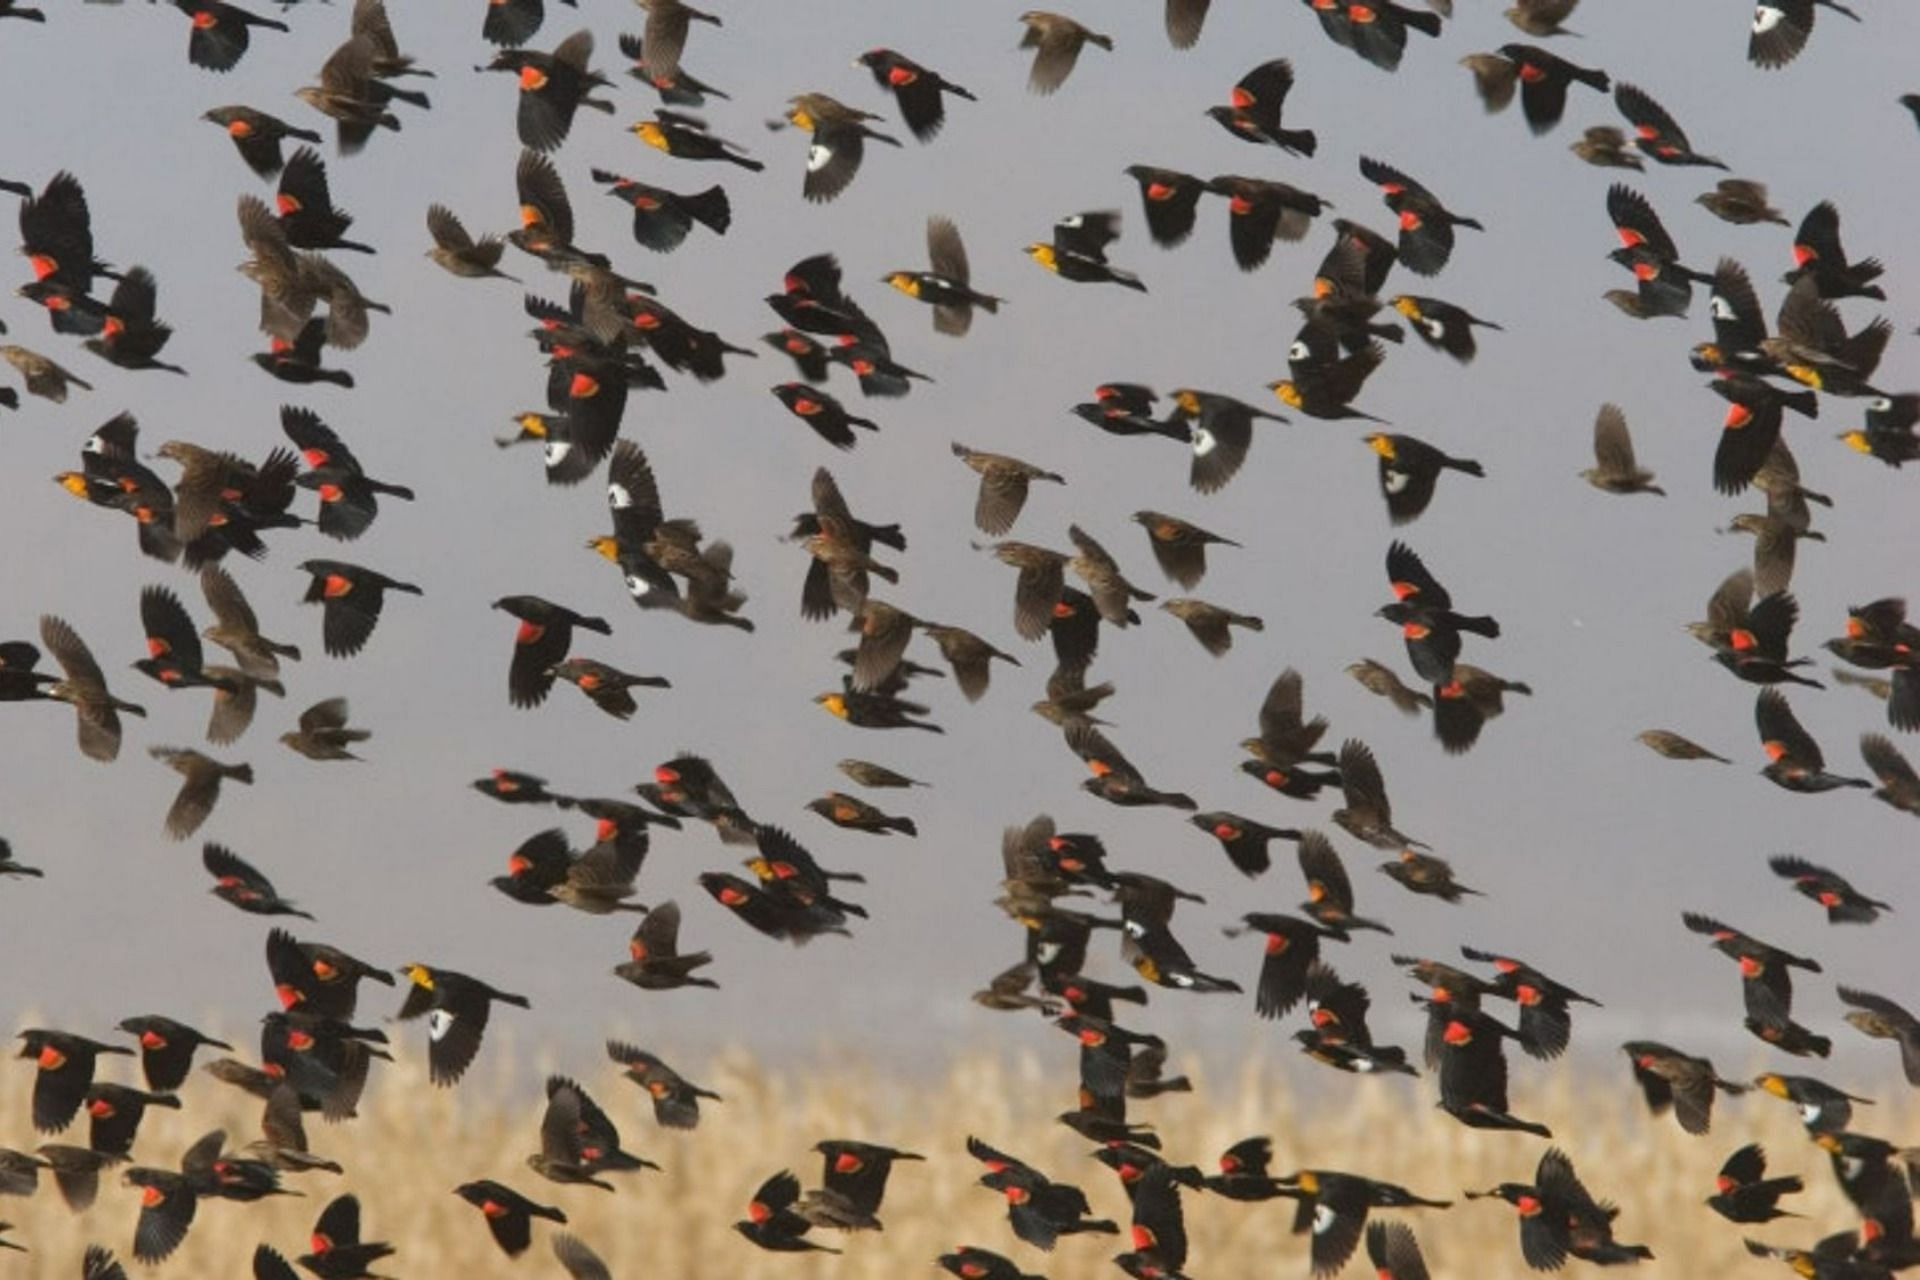 Hundreds of birds fall from the sky during migration (Image via Qualisule/iStock)